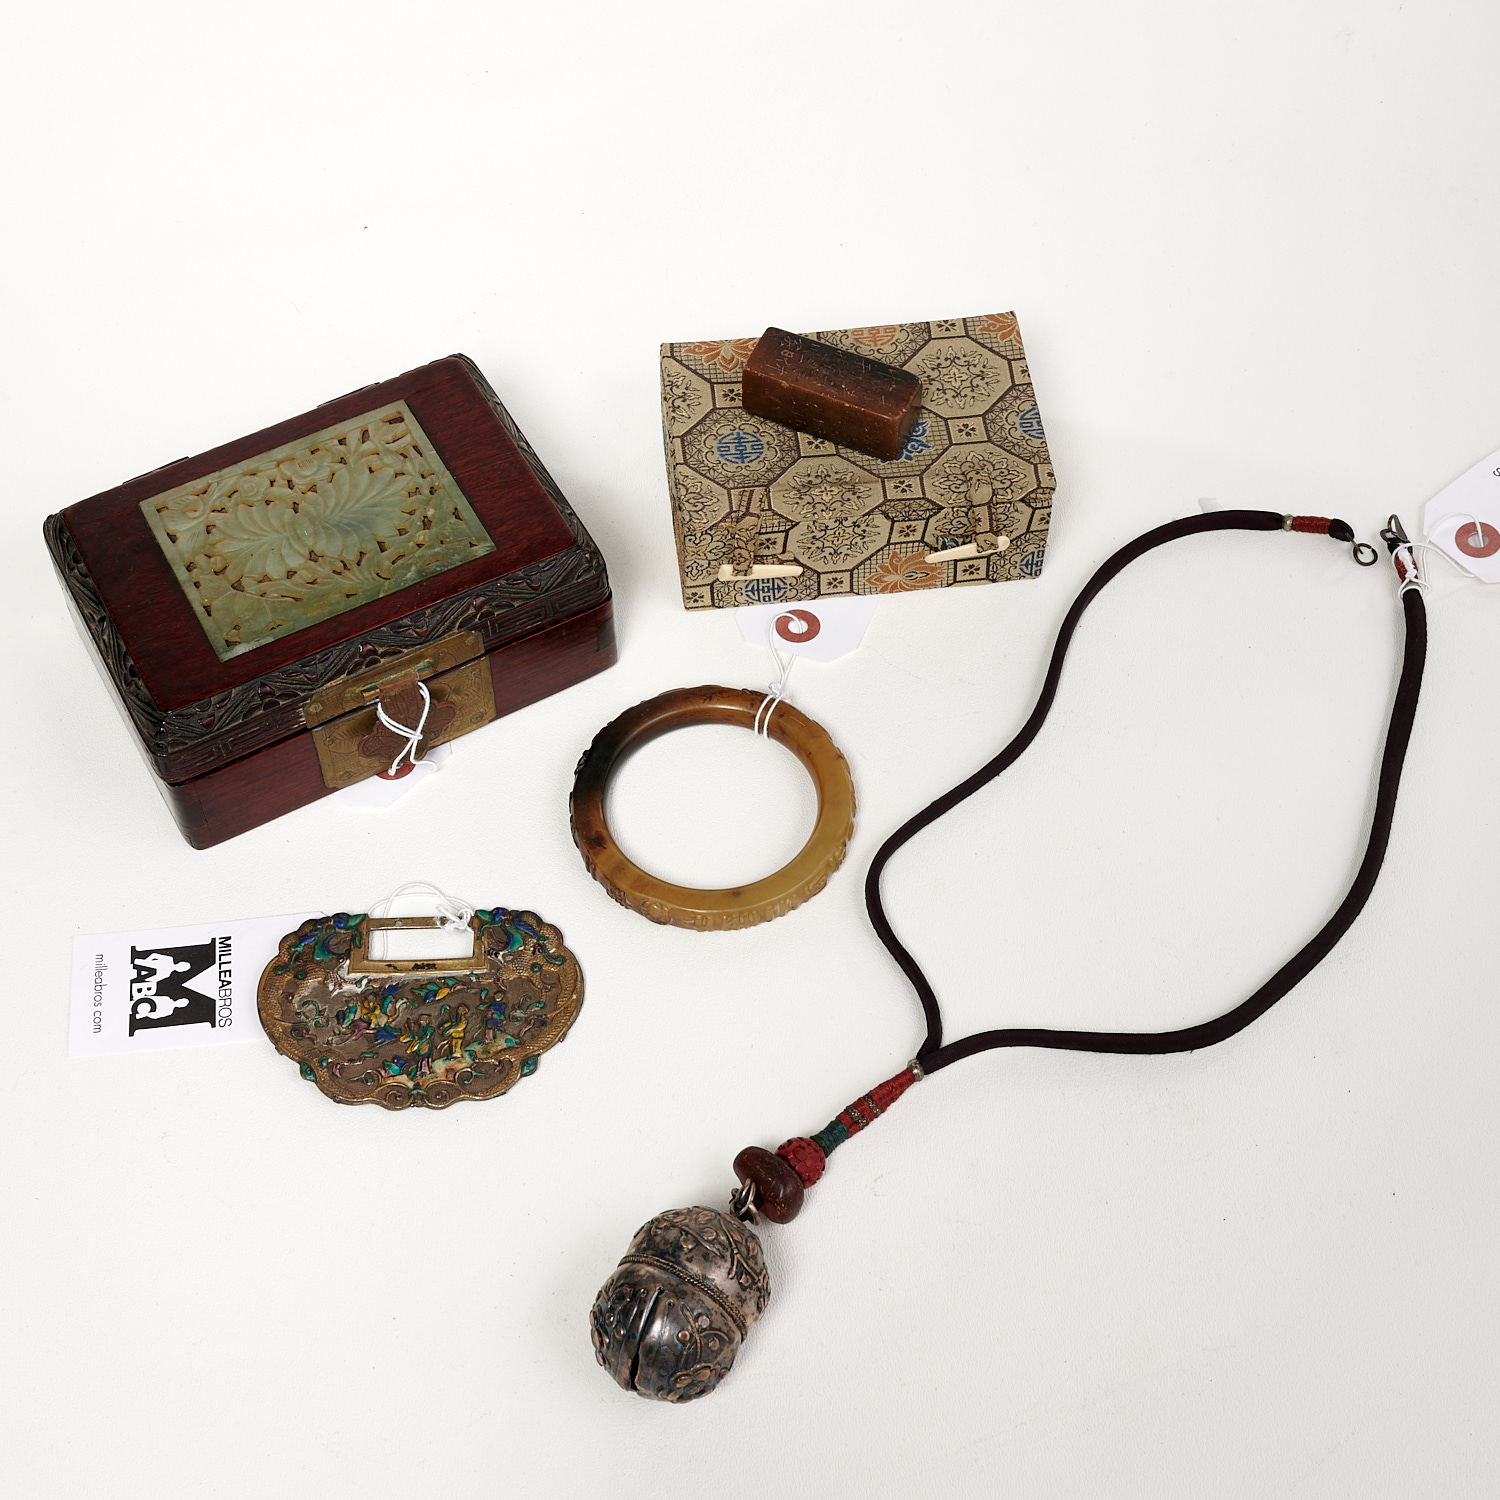 CHINESE TIBETAN JEWELRY AND OBJECTS 36233e